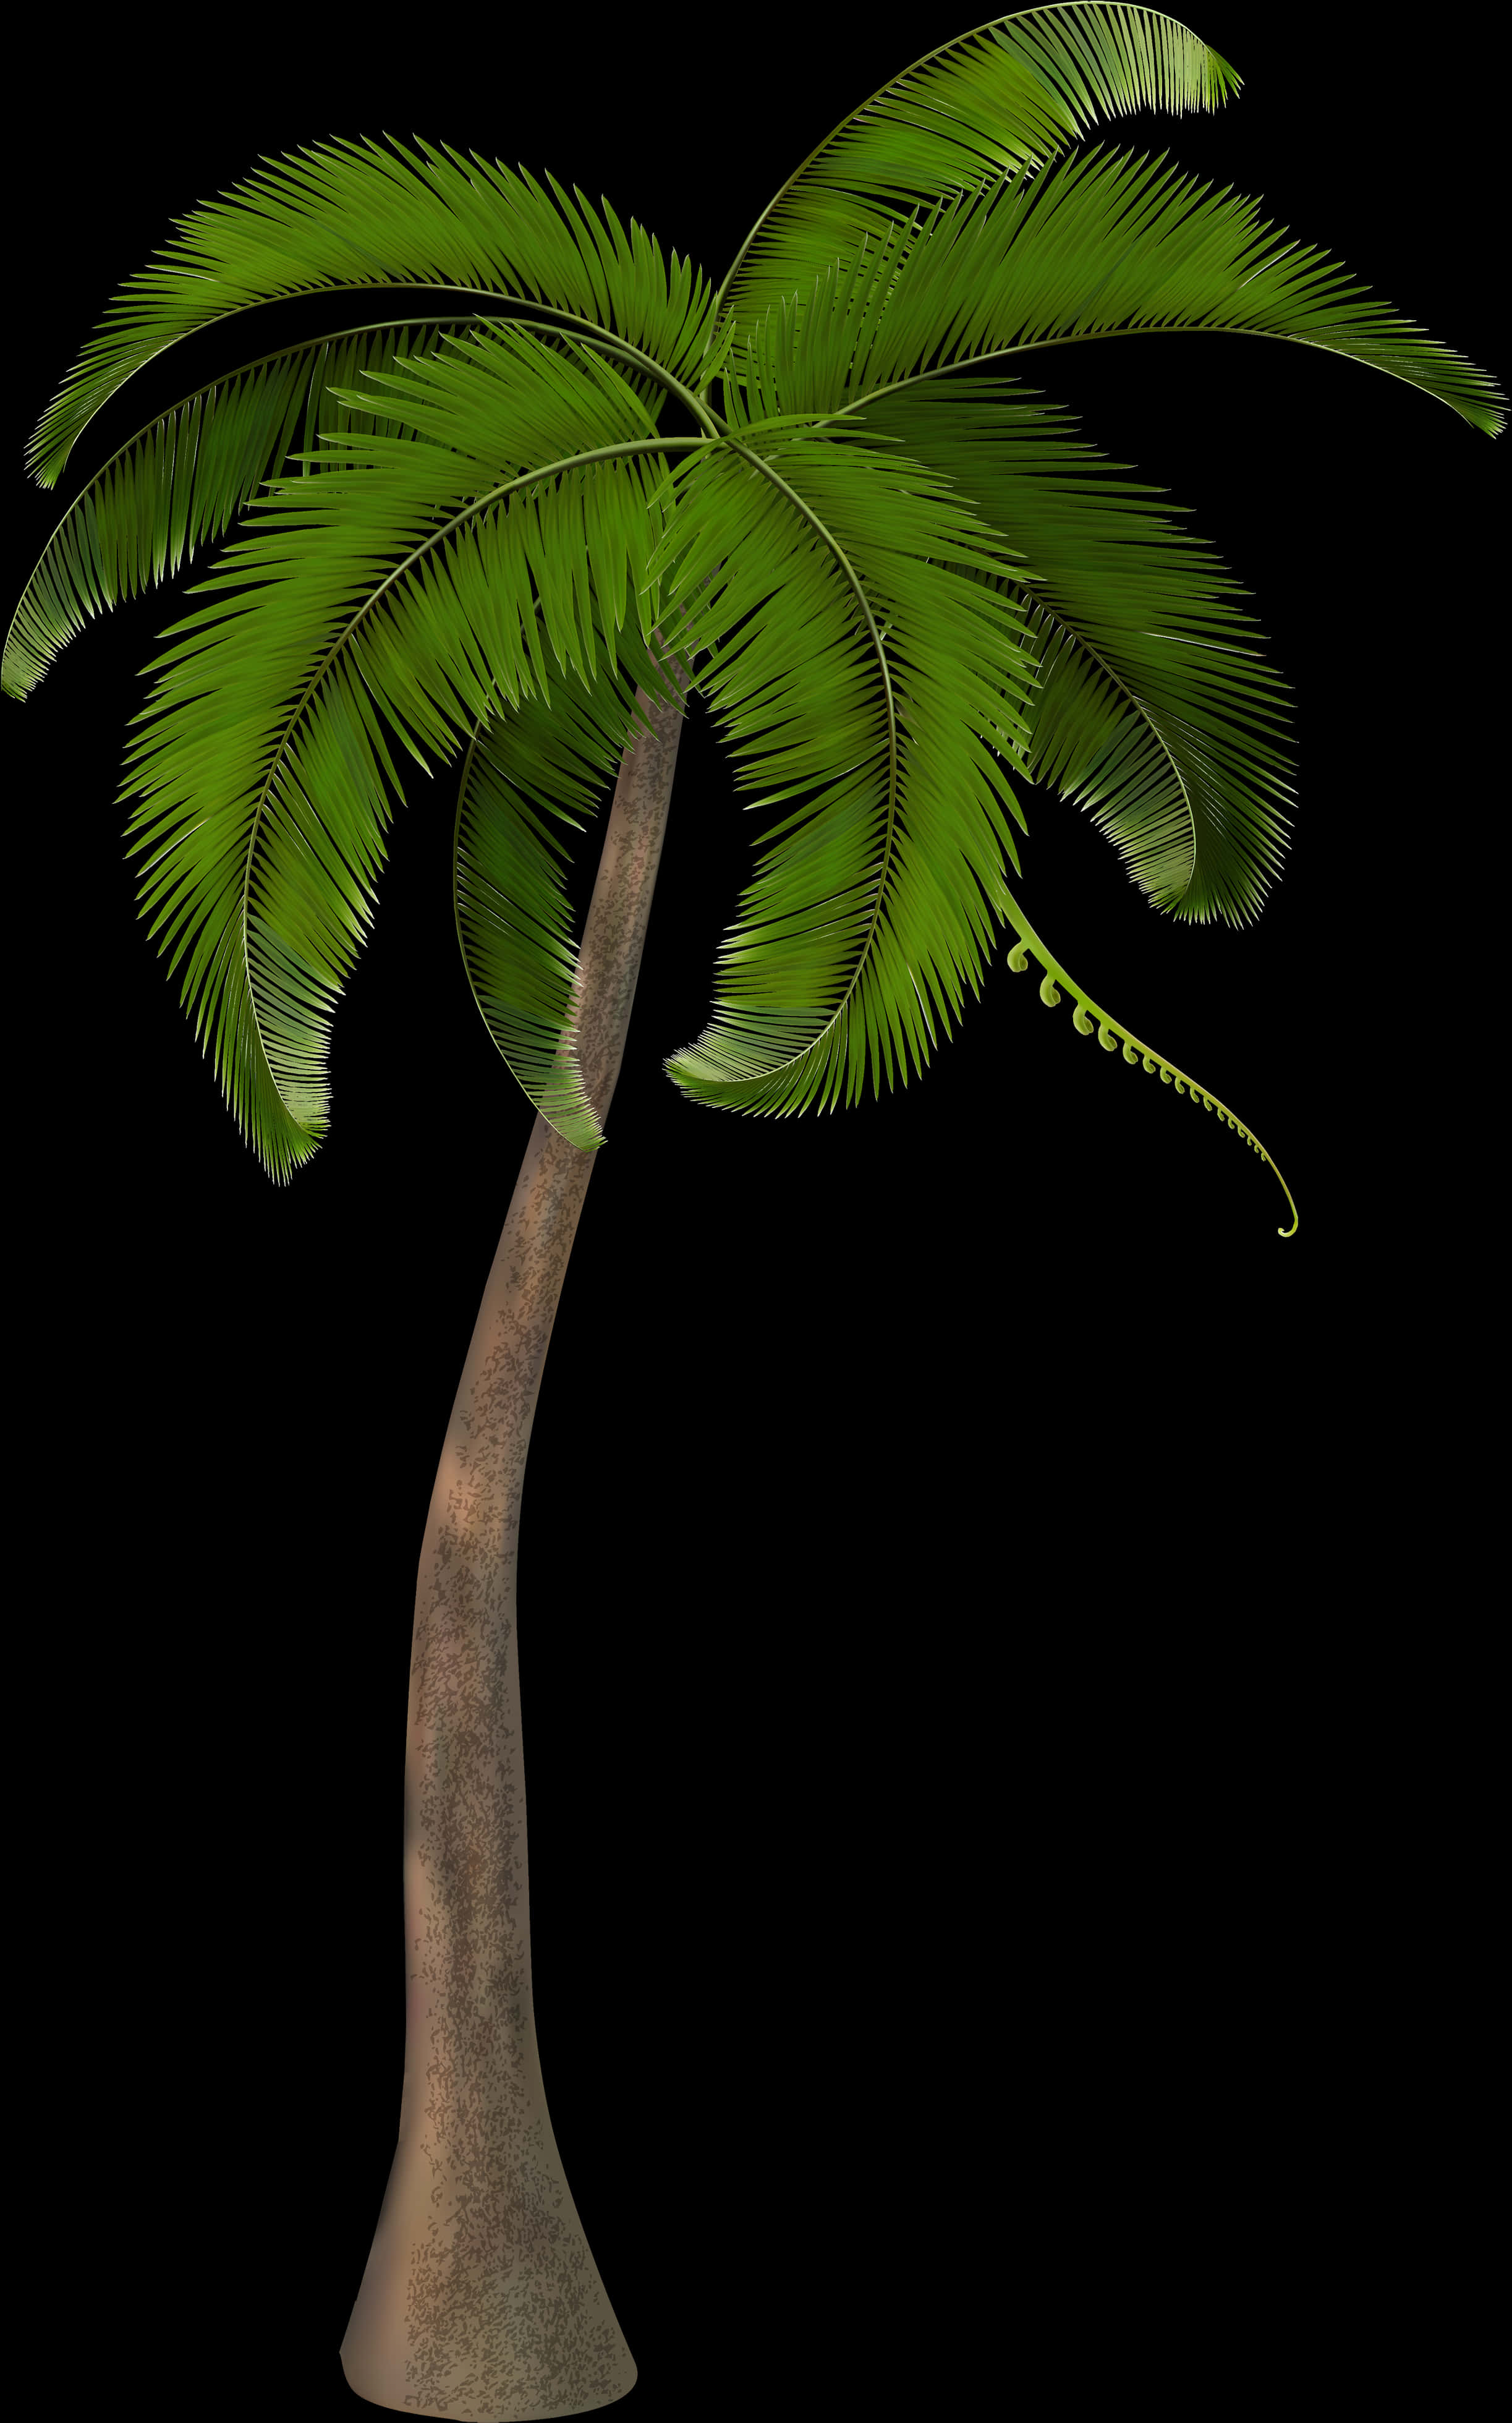 Tropical Palm Tree Isolated Black Background